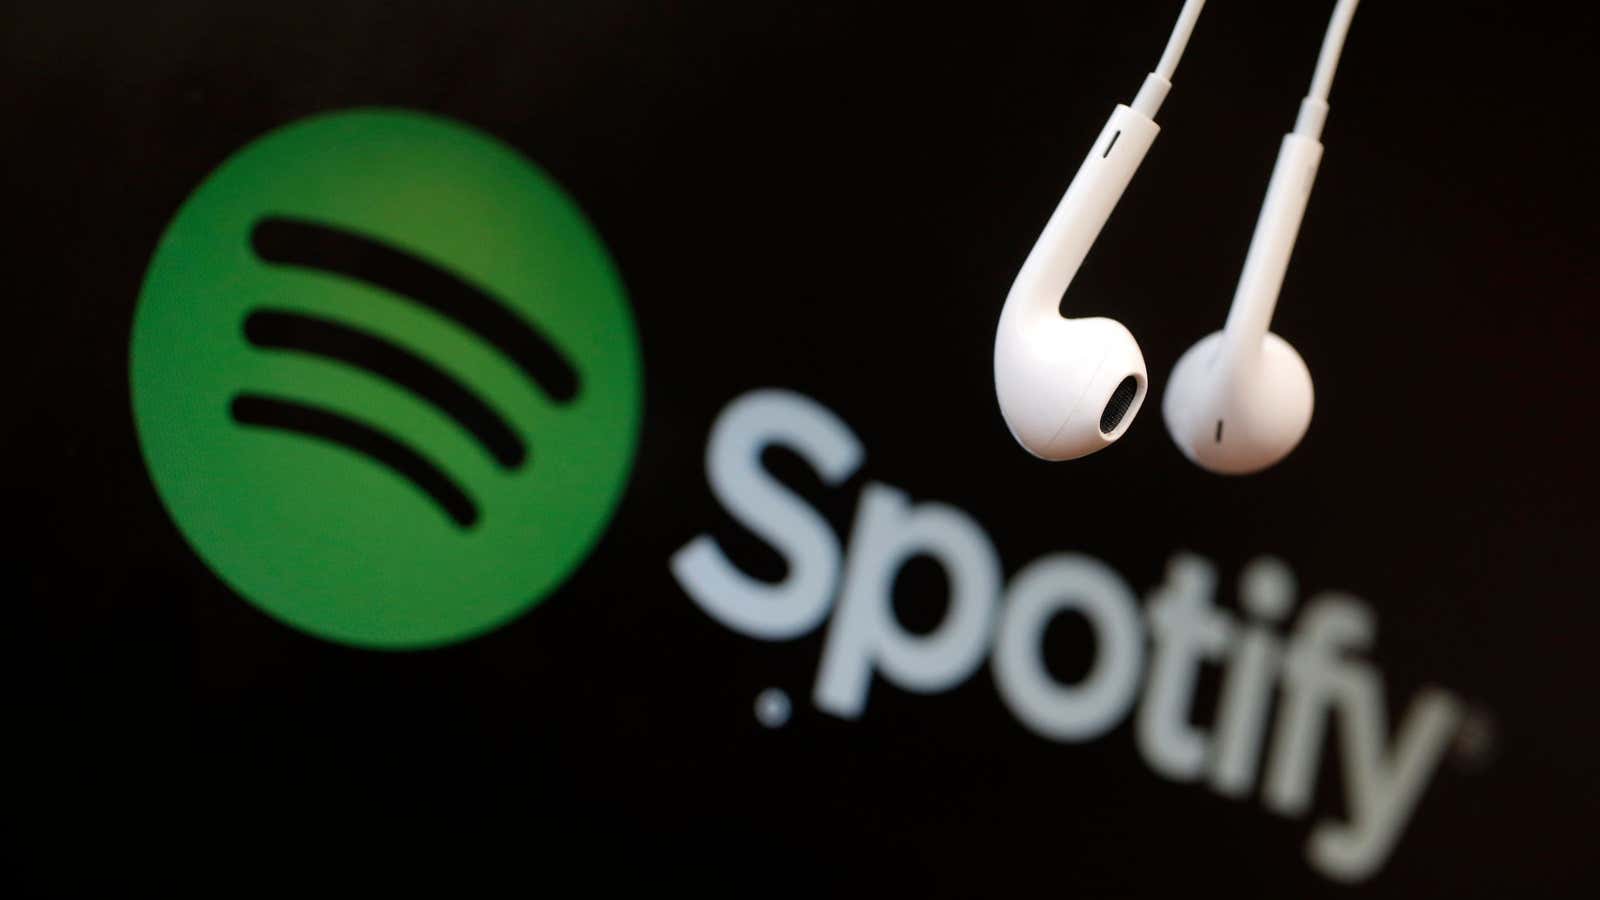 Will other streaming platforms start cracking down?